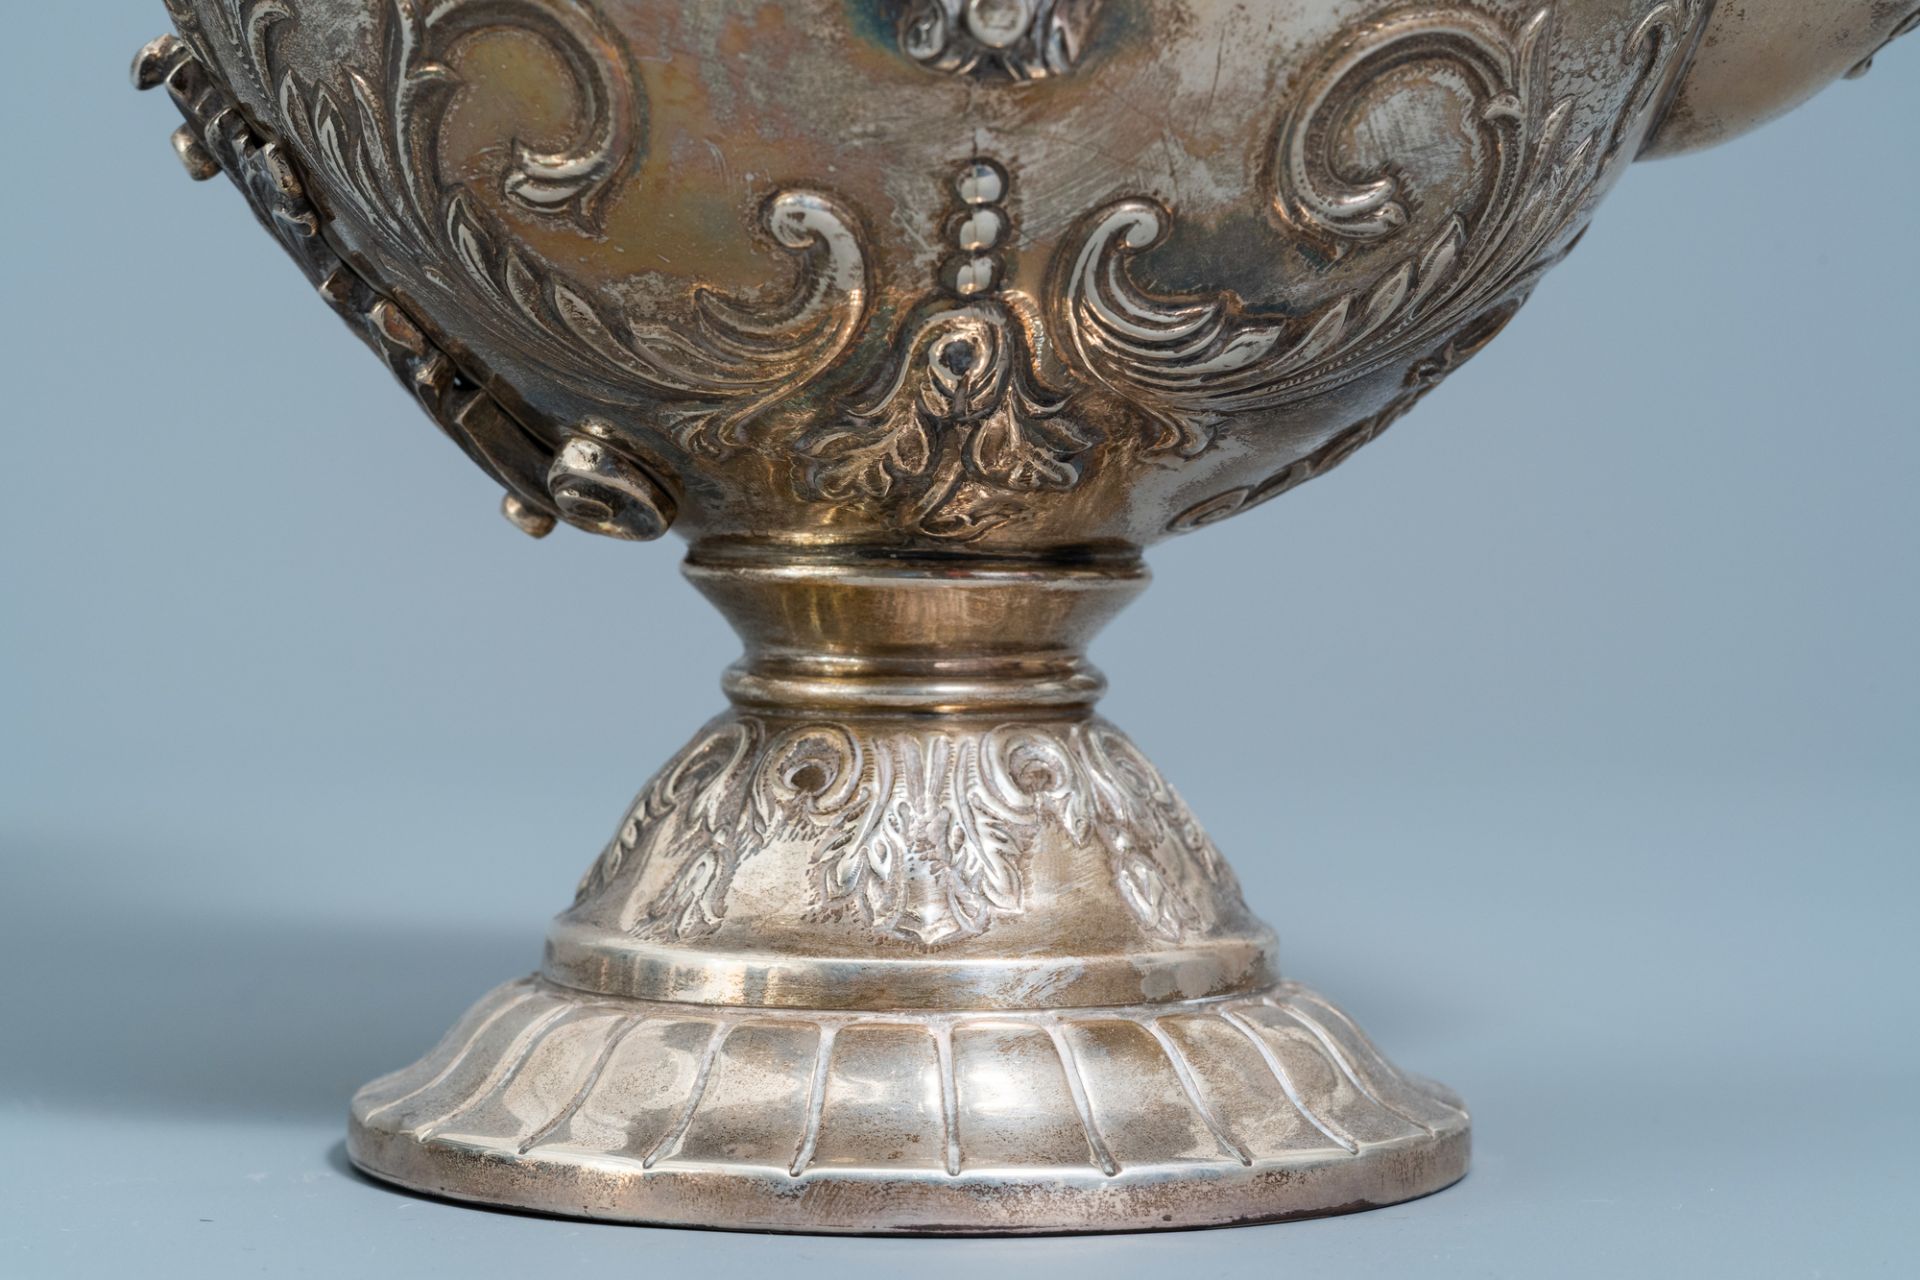 A Spanish inlaid silver Historicism jug with floral design and swans, 20th C. - Image 16 of 17